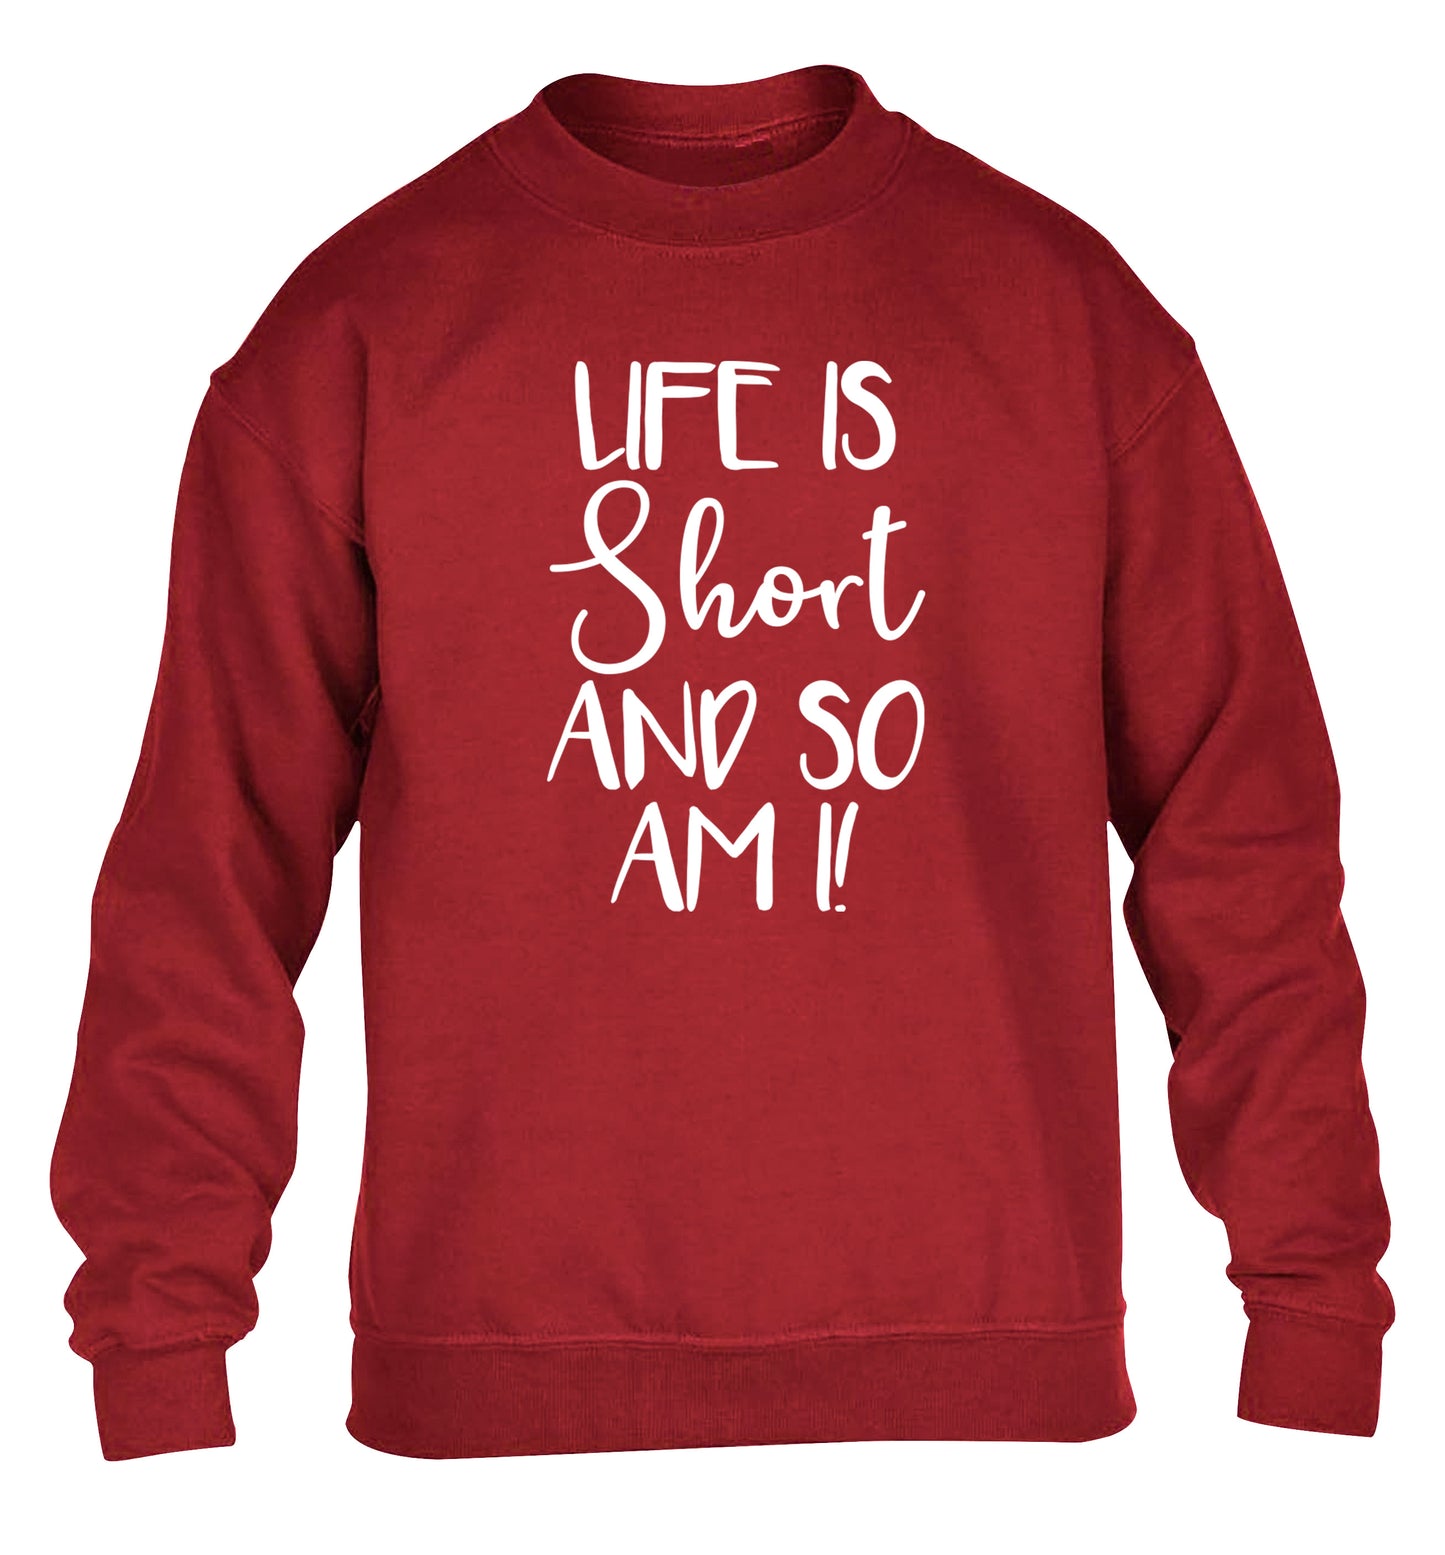 Life is short and so am I! children's grey sweater 12-13 Years